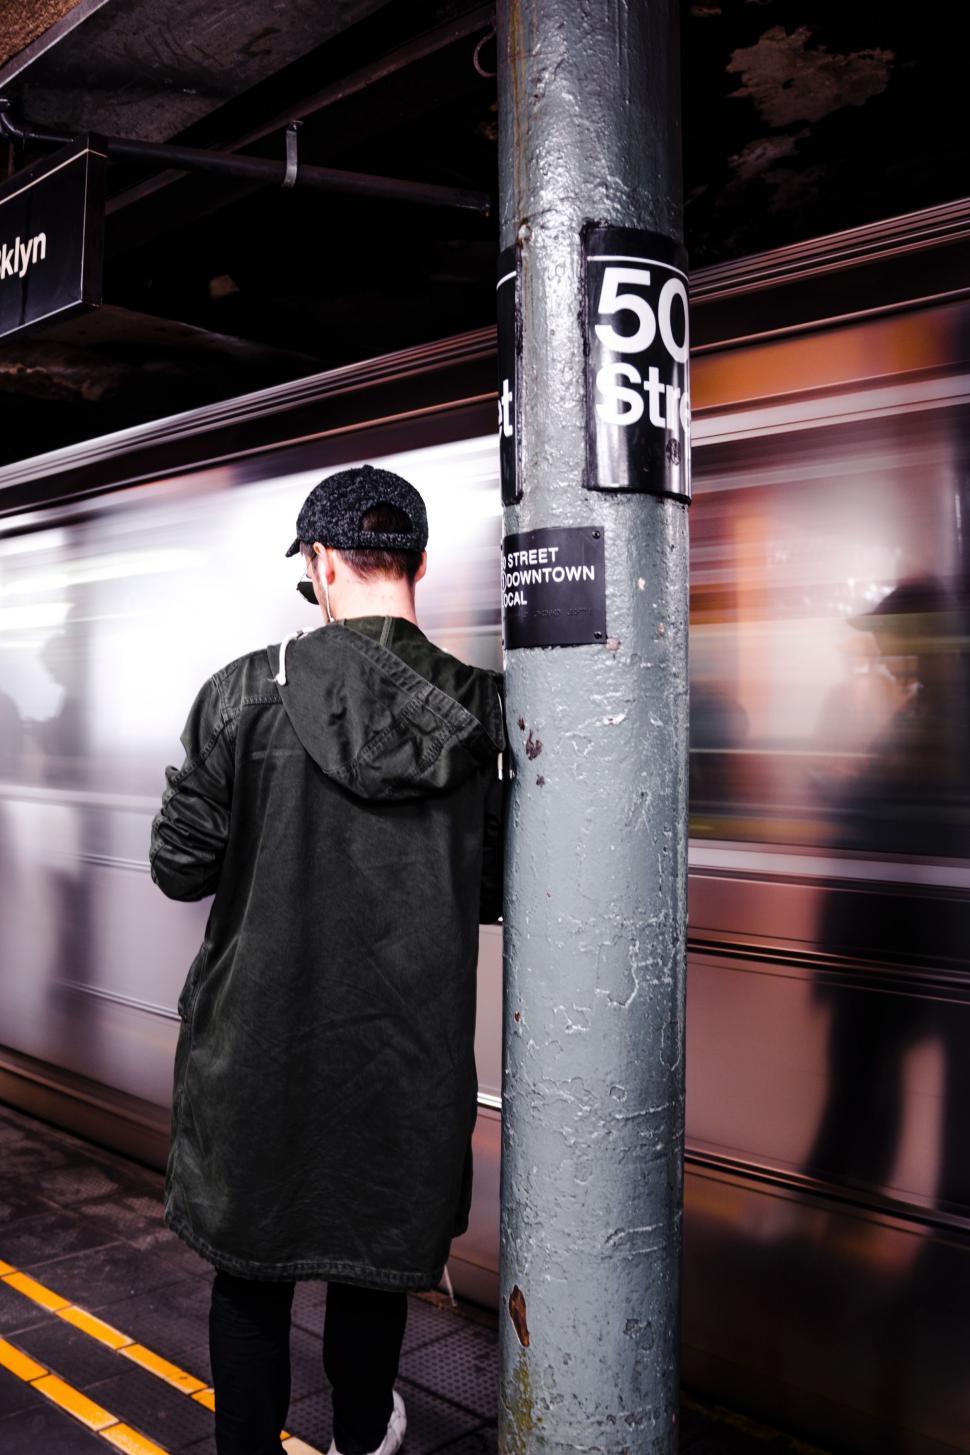 Free Image of Man Standing Next to Pole Near Train 